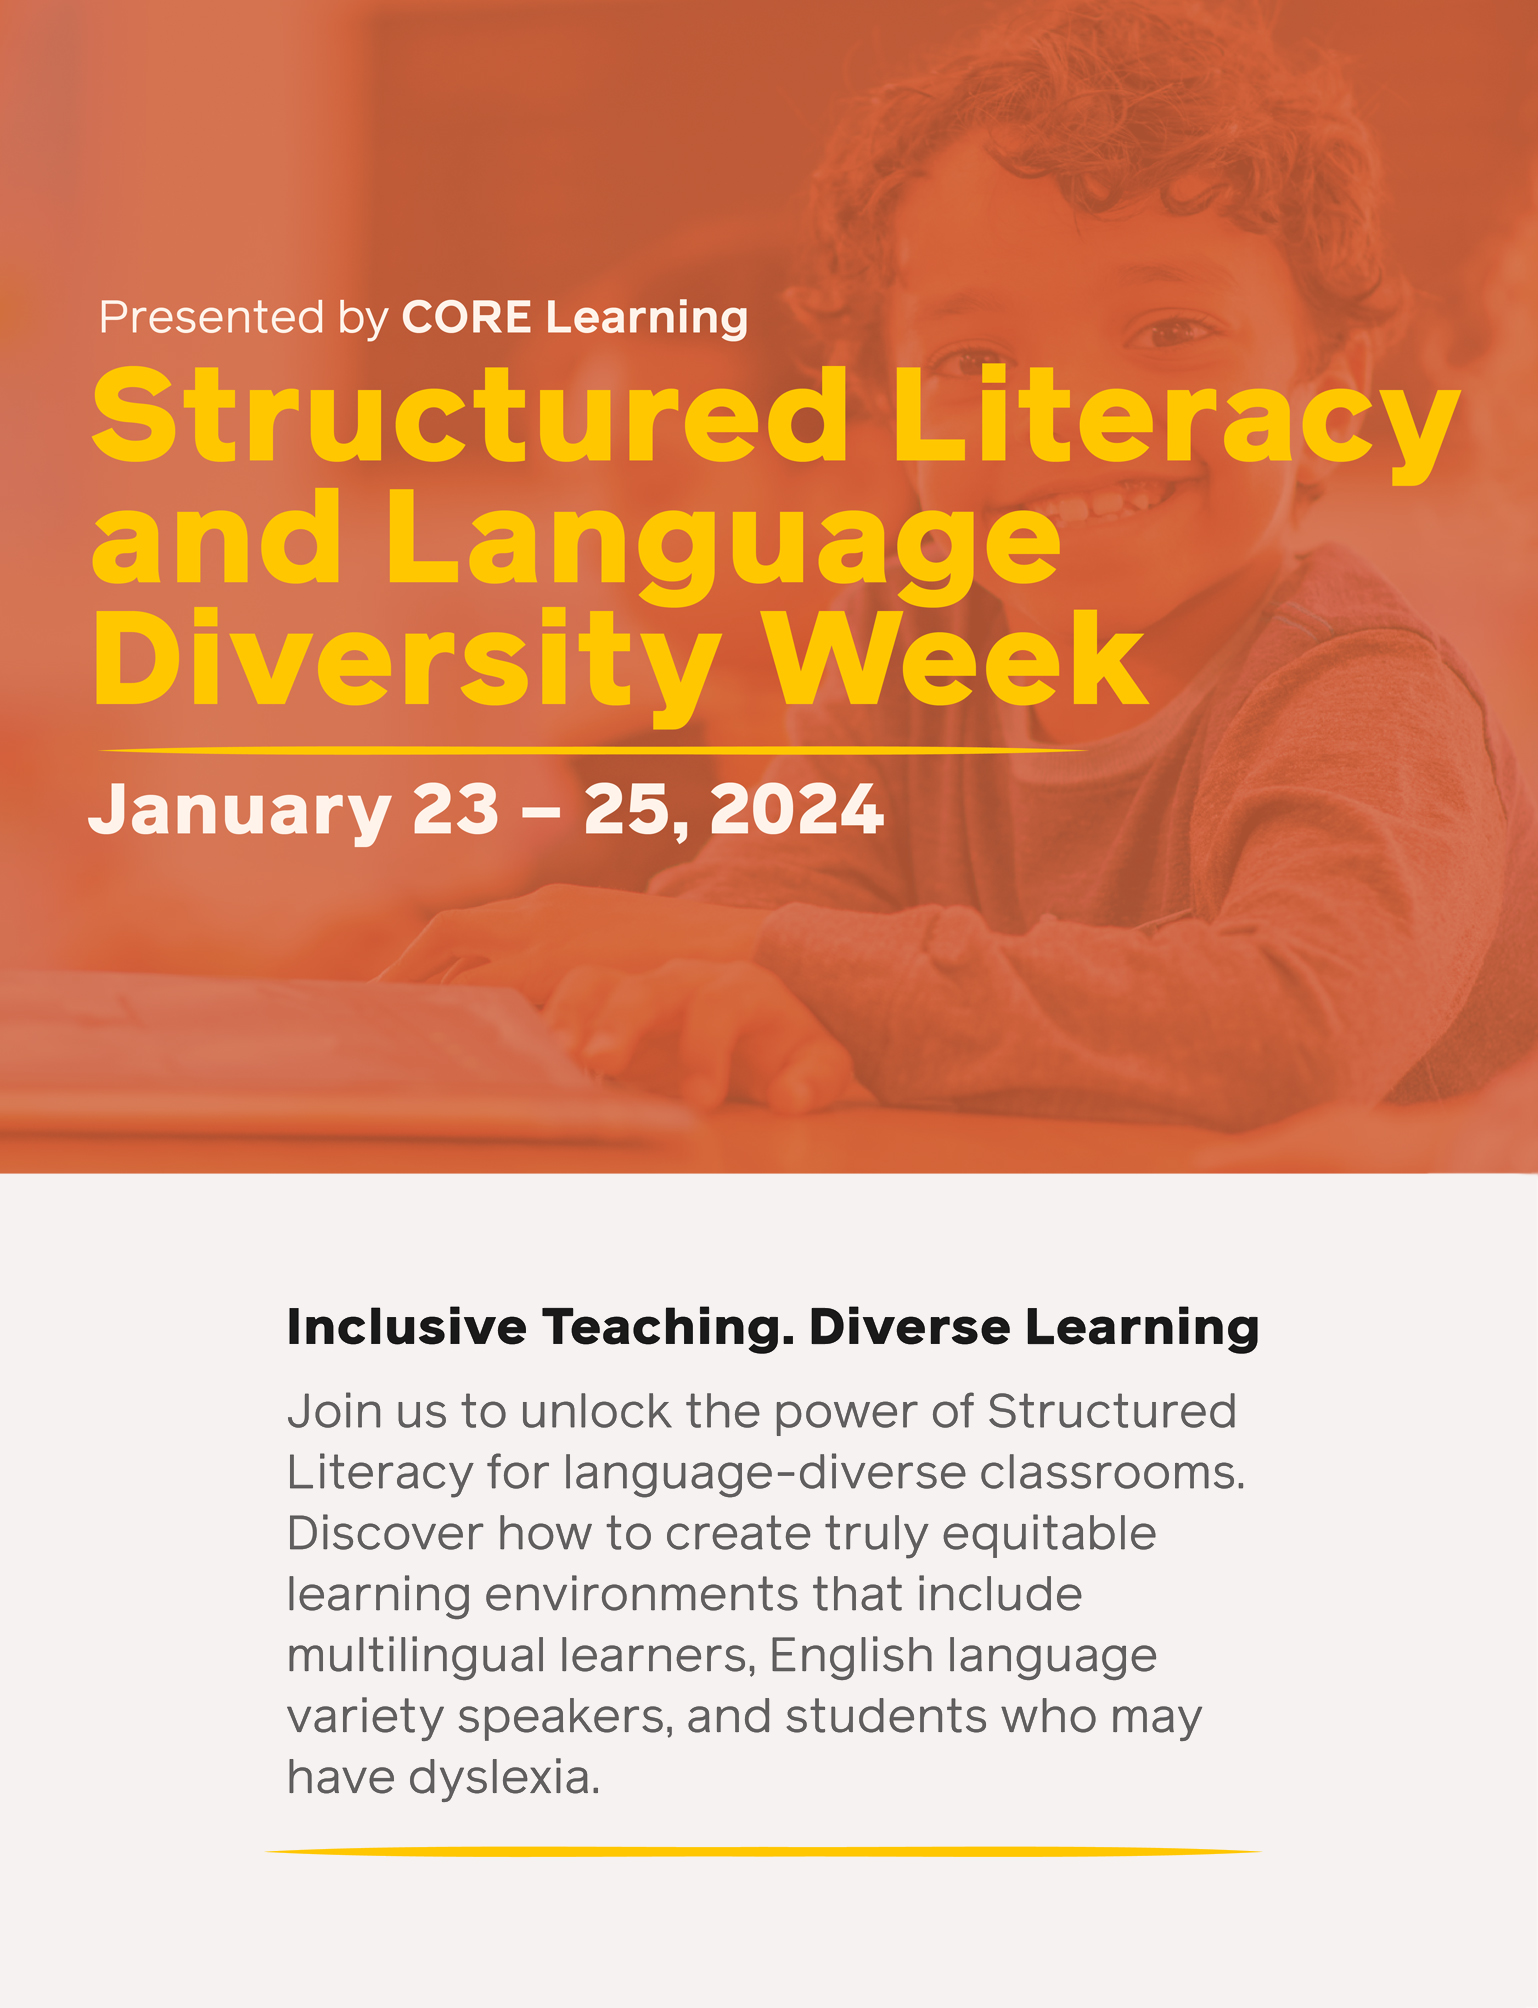 CORE Learning Language and Learning Diversity Week 2024